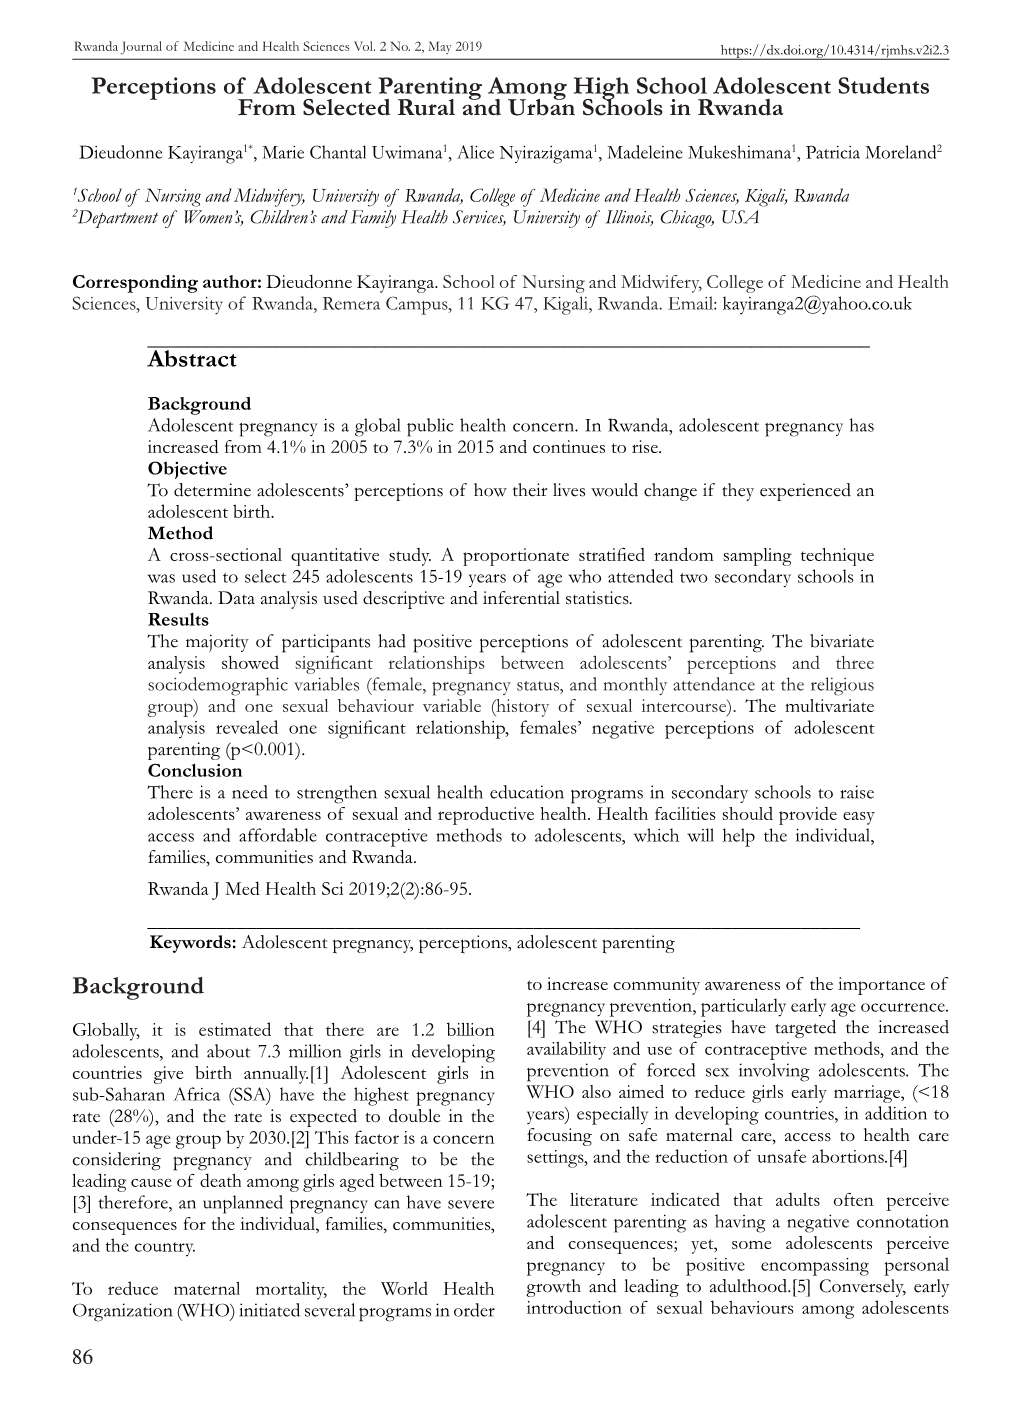 Perceptions of Adolescent Parenting Among High School Adolescent Students from Selected Rural and Urban Schools in Rwanda